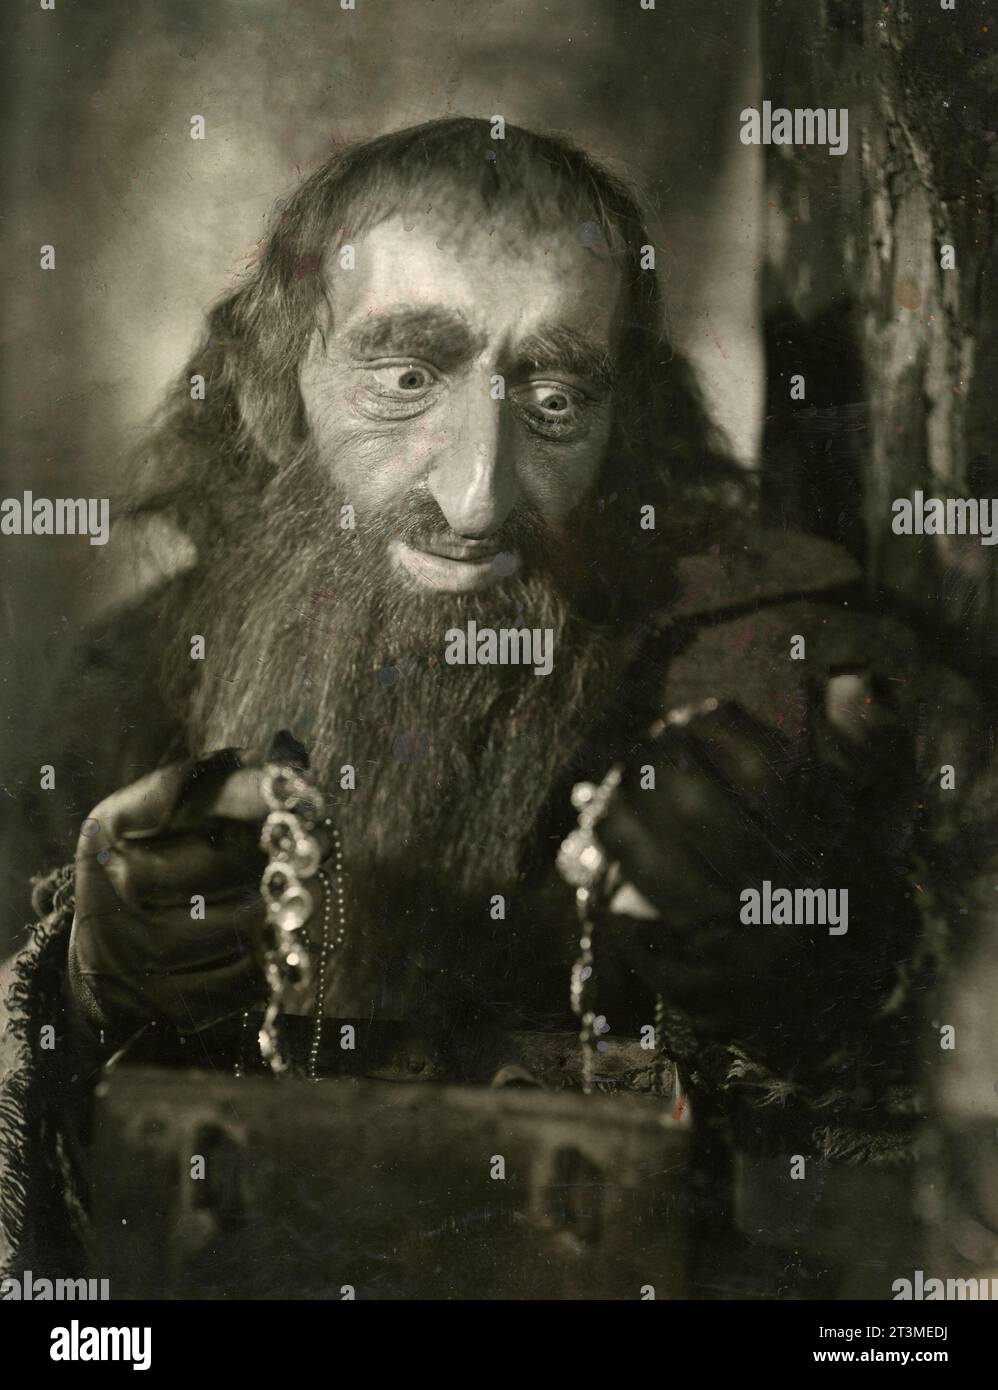 British actor Alec Guinness in the movie Oliver Twist, UK 1948 Stock Photo